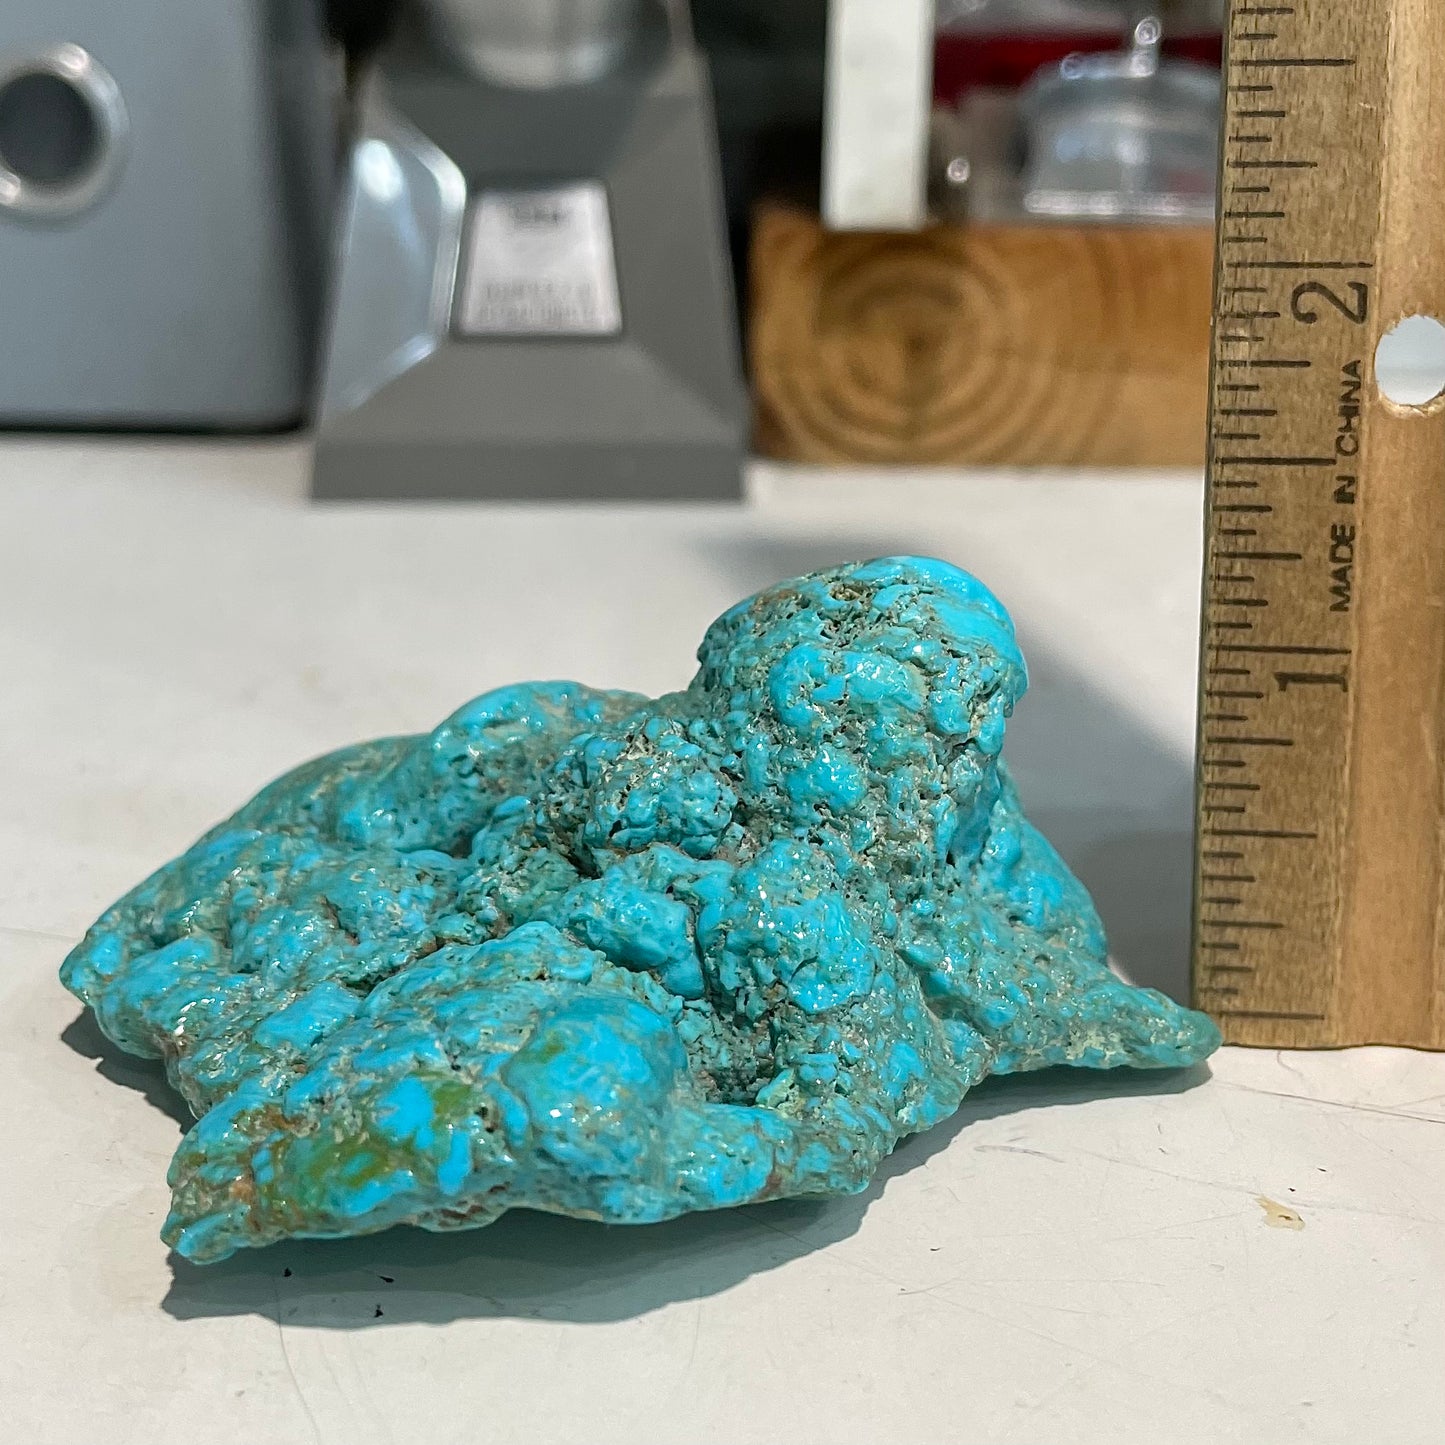 A loose, slightly polished natural turquoise nugget from Sleeping Beauty Mine, Arizona.